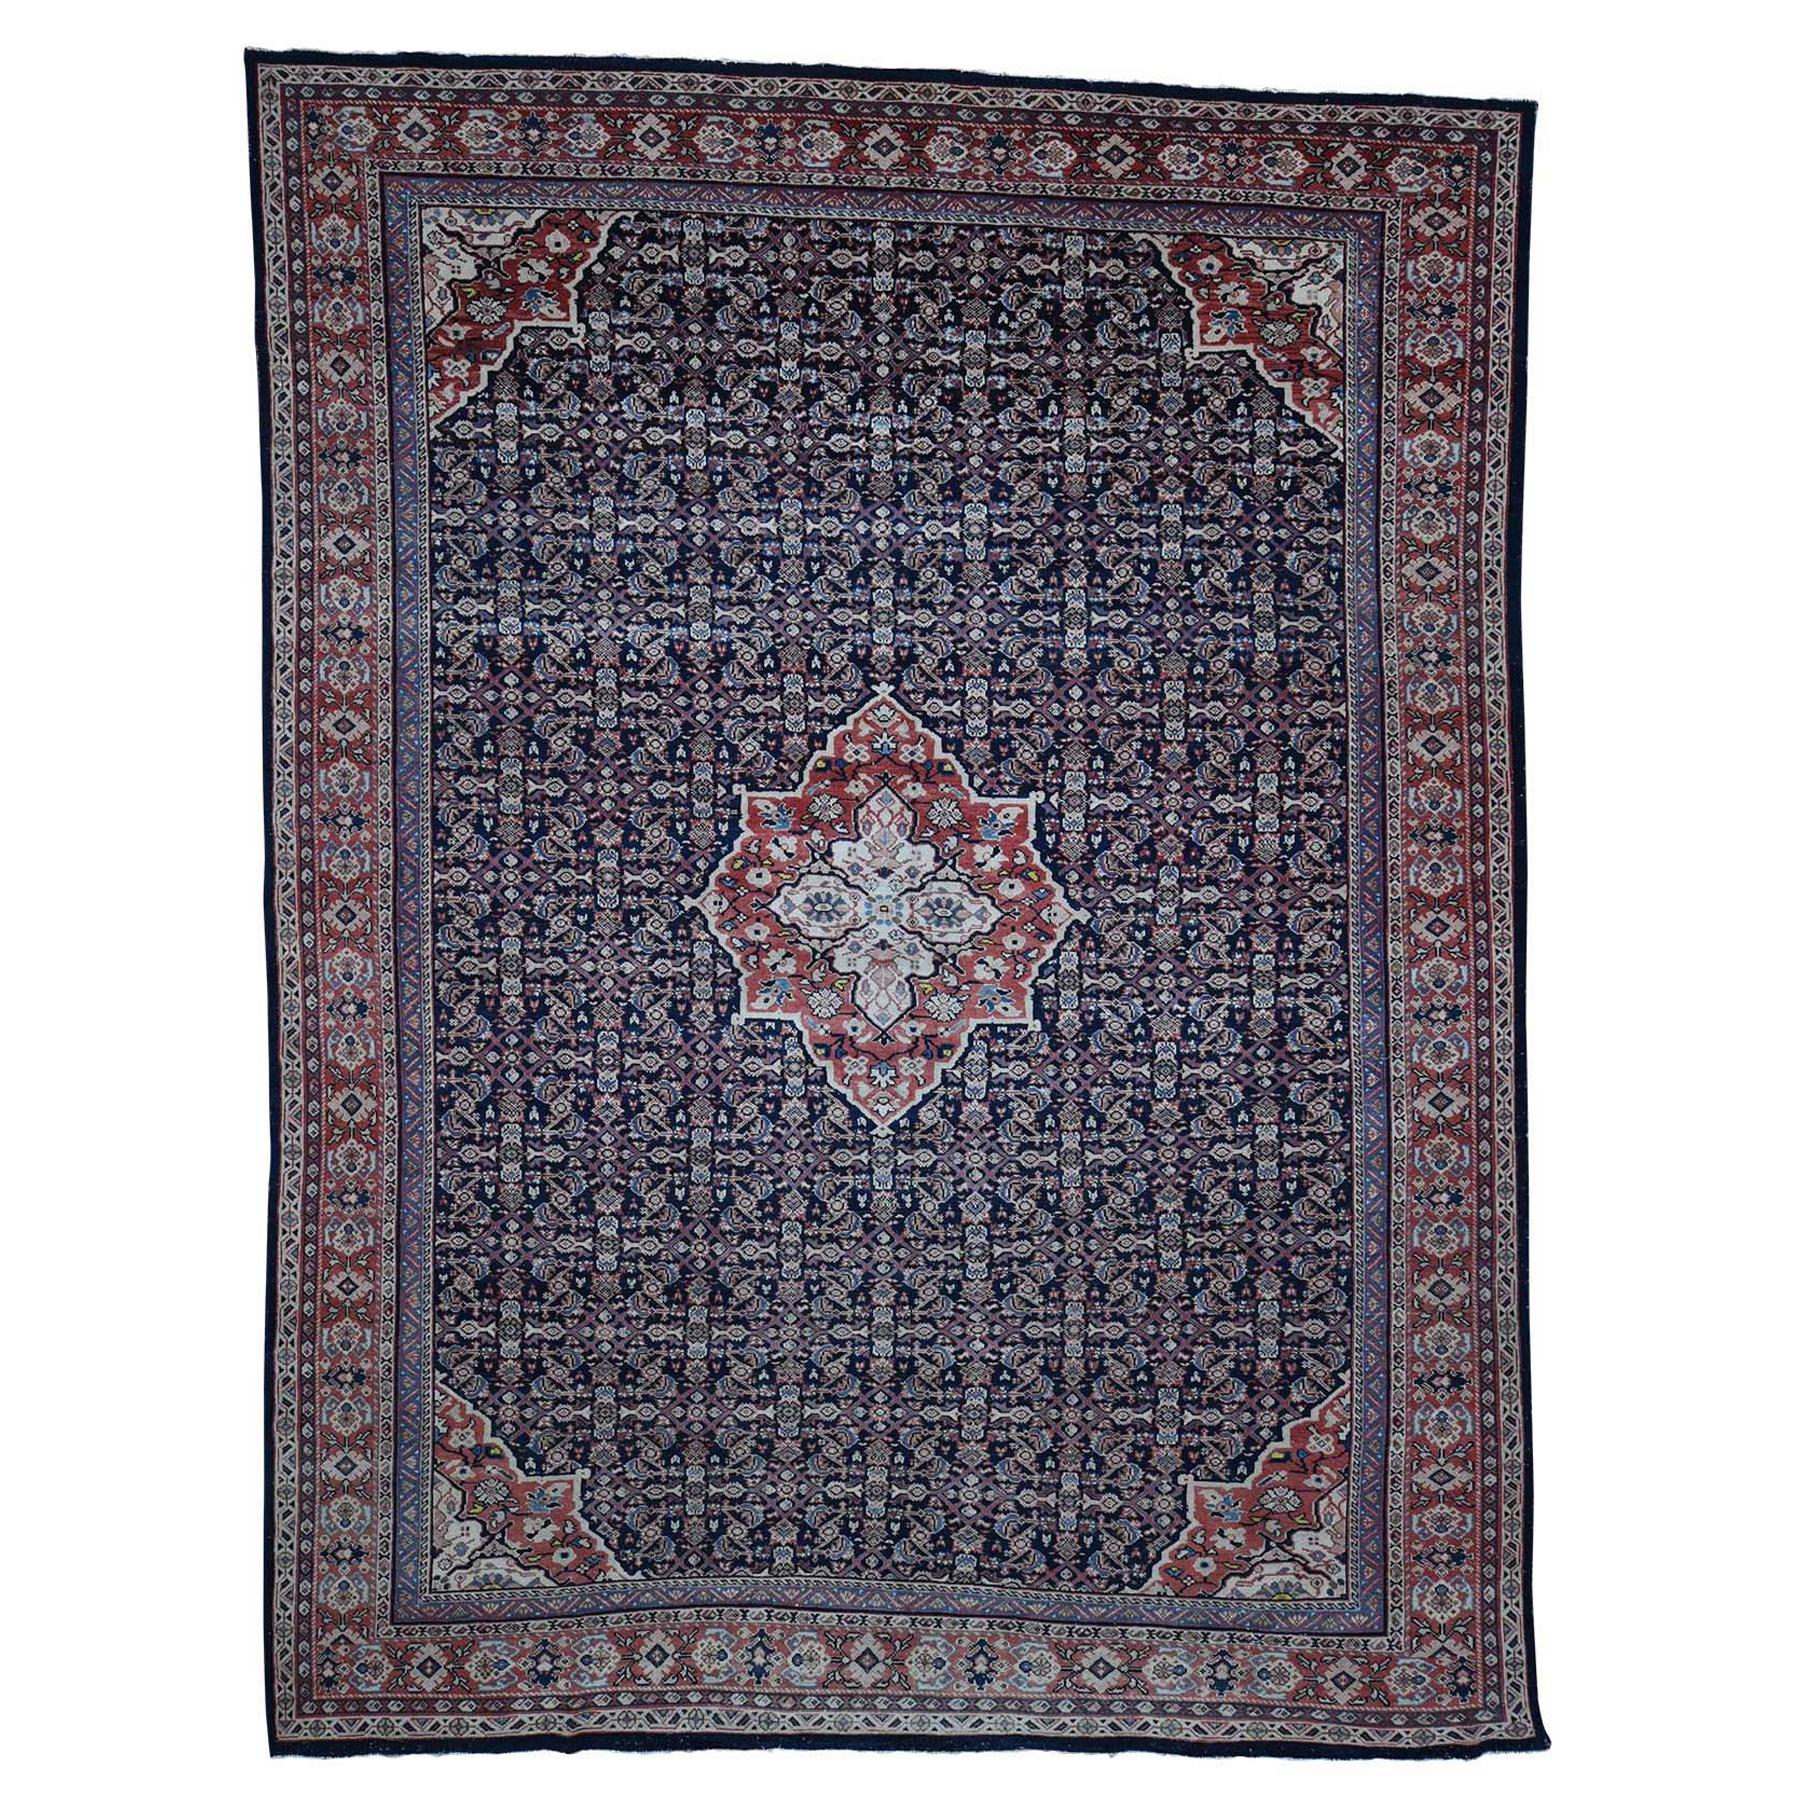 Antique Persian Mahal Even Wear Navy Blue Hand-Knotted Oriental Rug